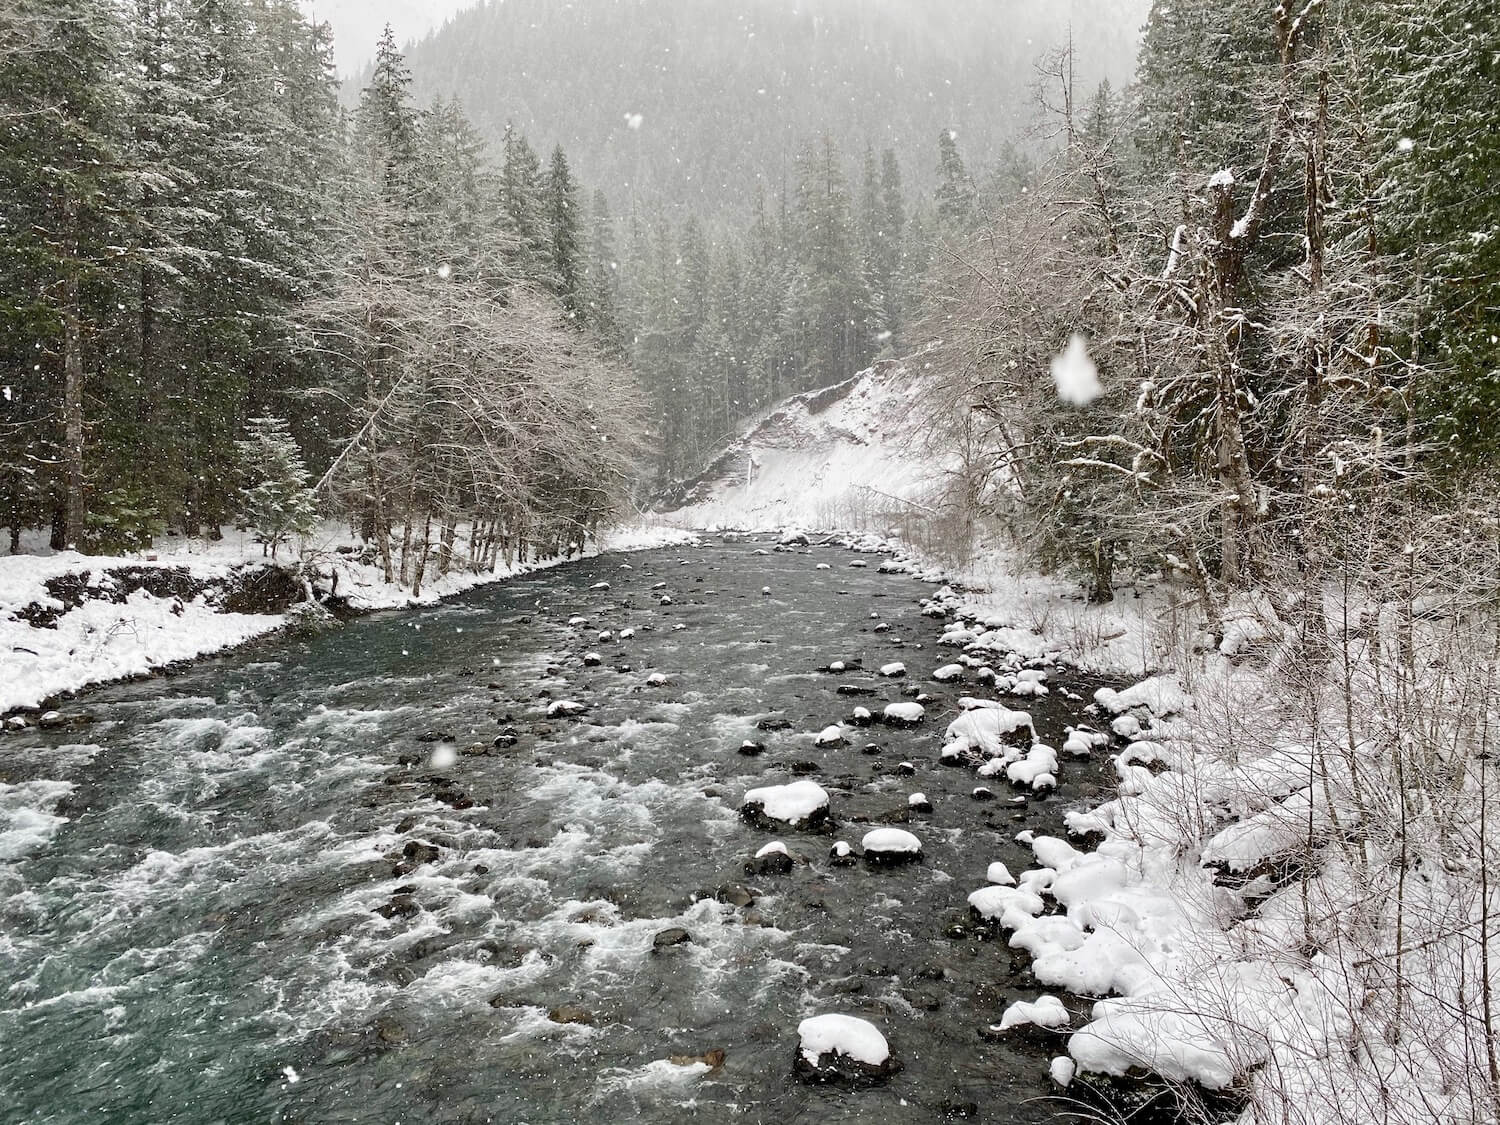 View of a briskly flowing creek near the Staircase entrance to Olympic National Park. Snow is falling and the fir and deciduous trees have accumulated snow as well as the rocks in the creek.